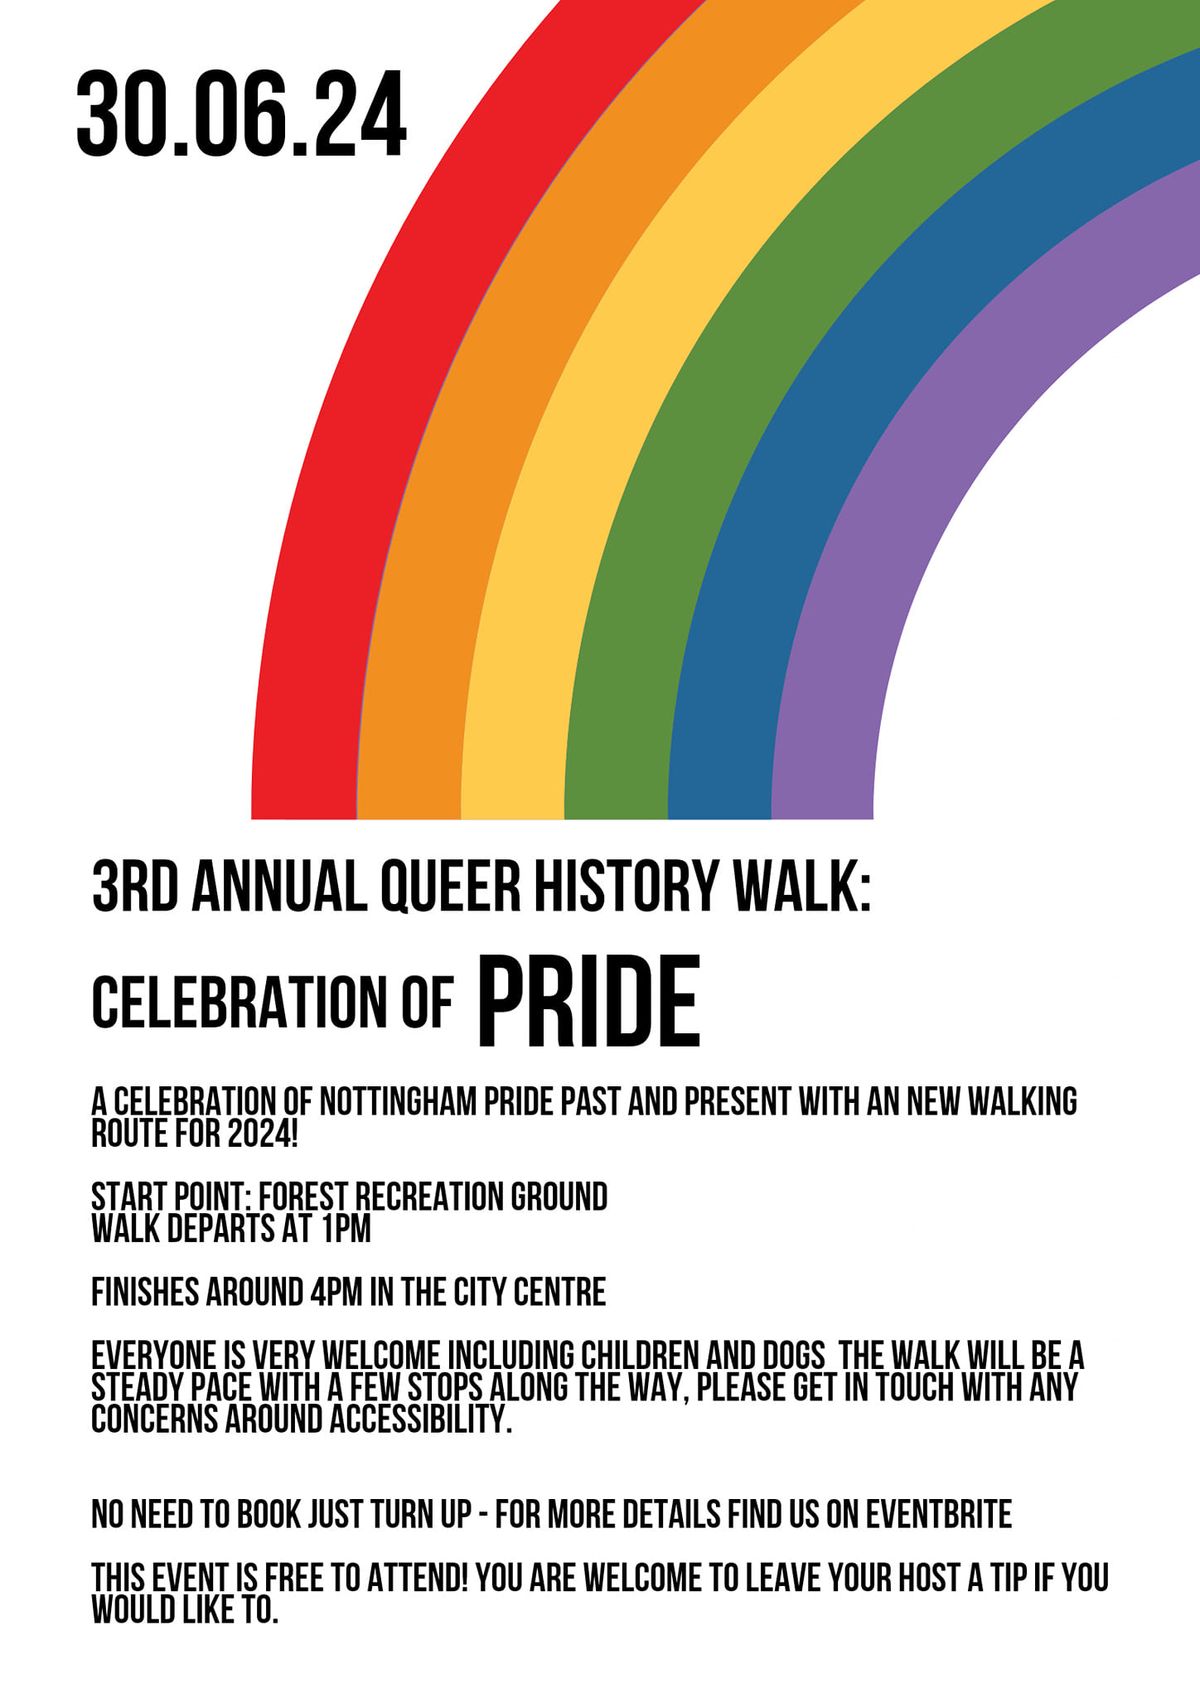 3rd Annual Queer History Walk - Celebrating PRIDE